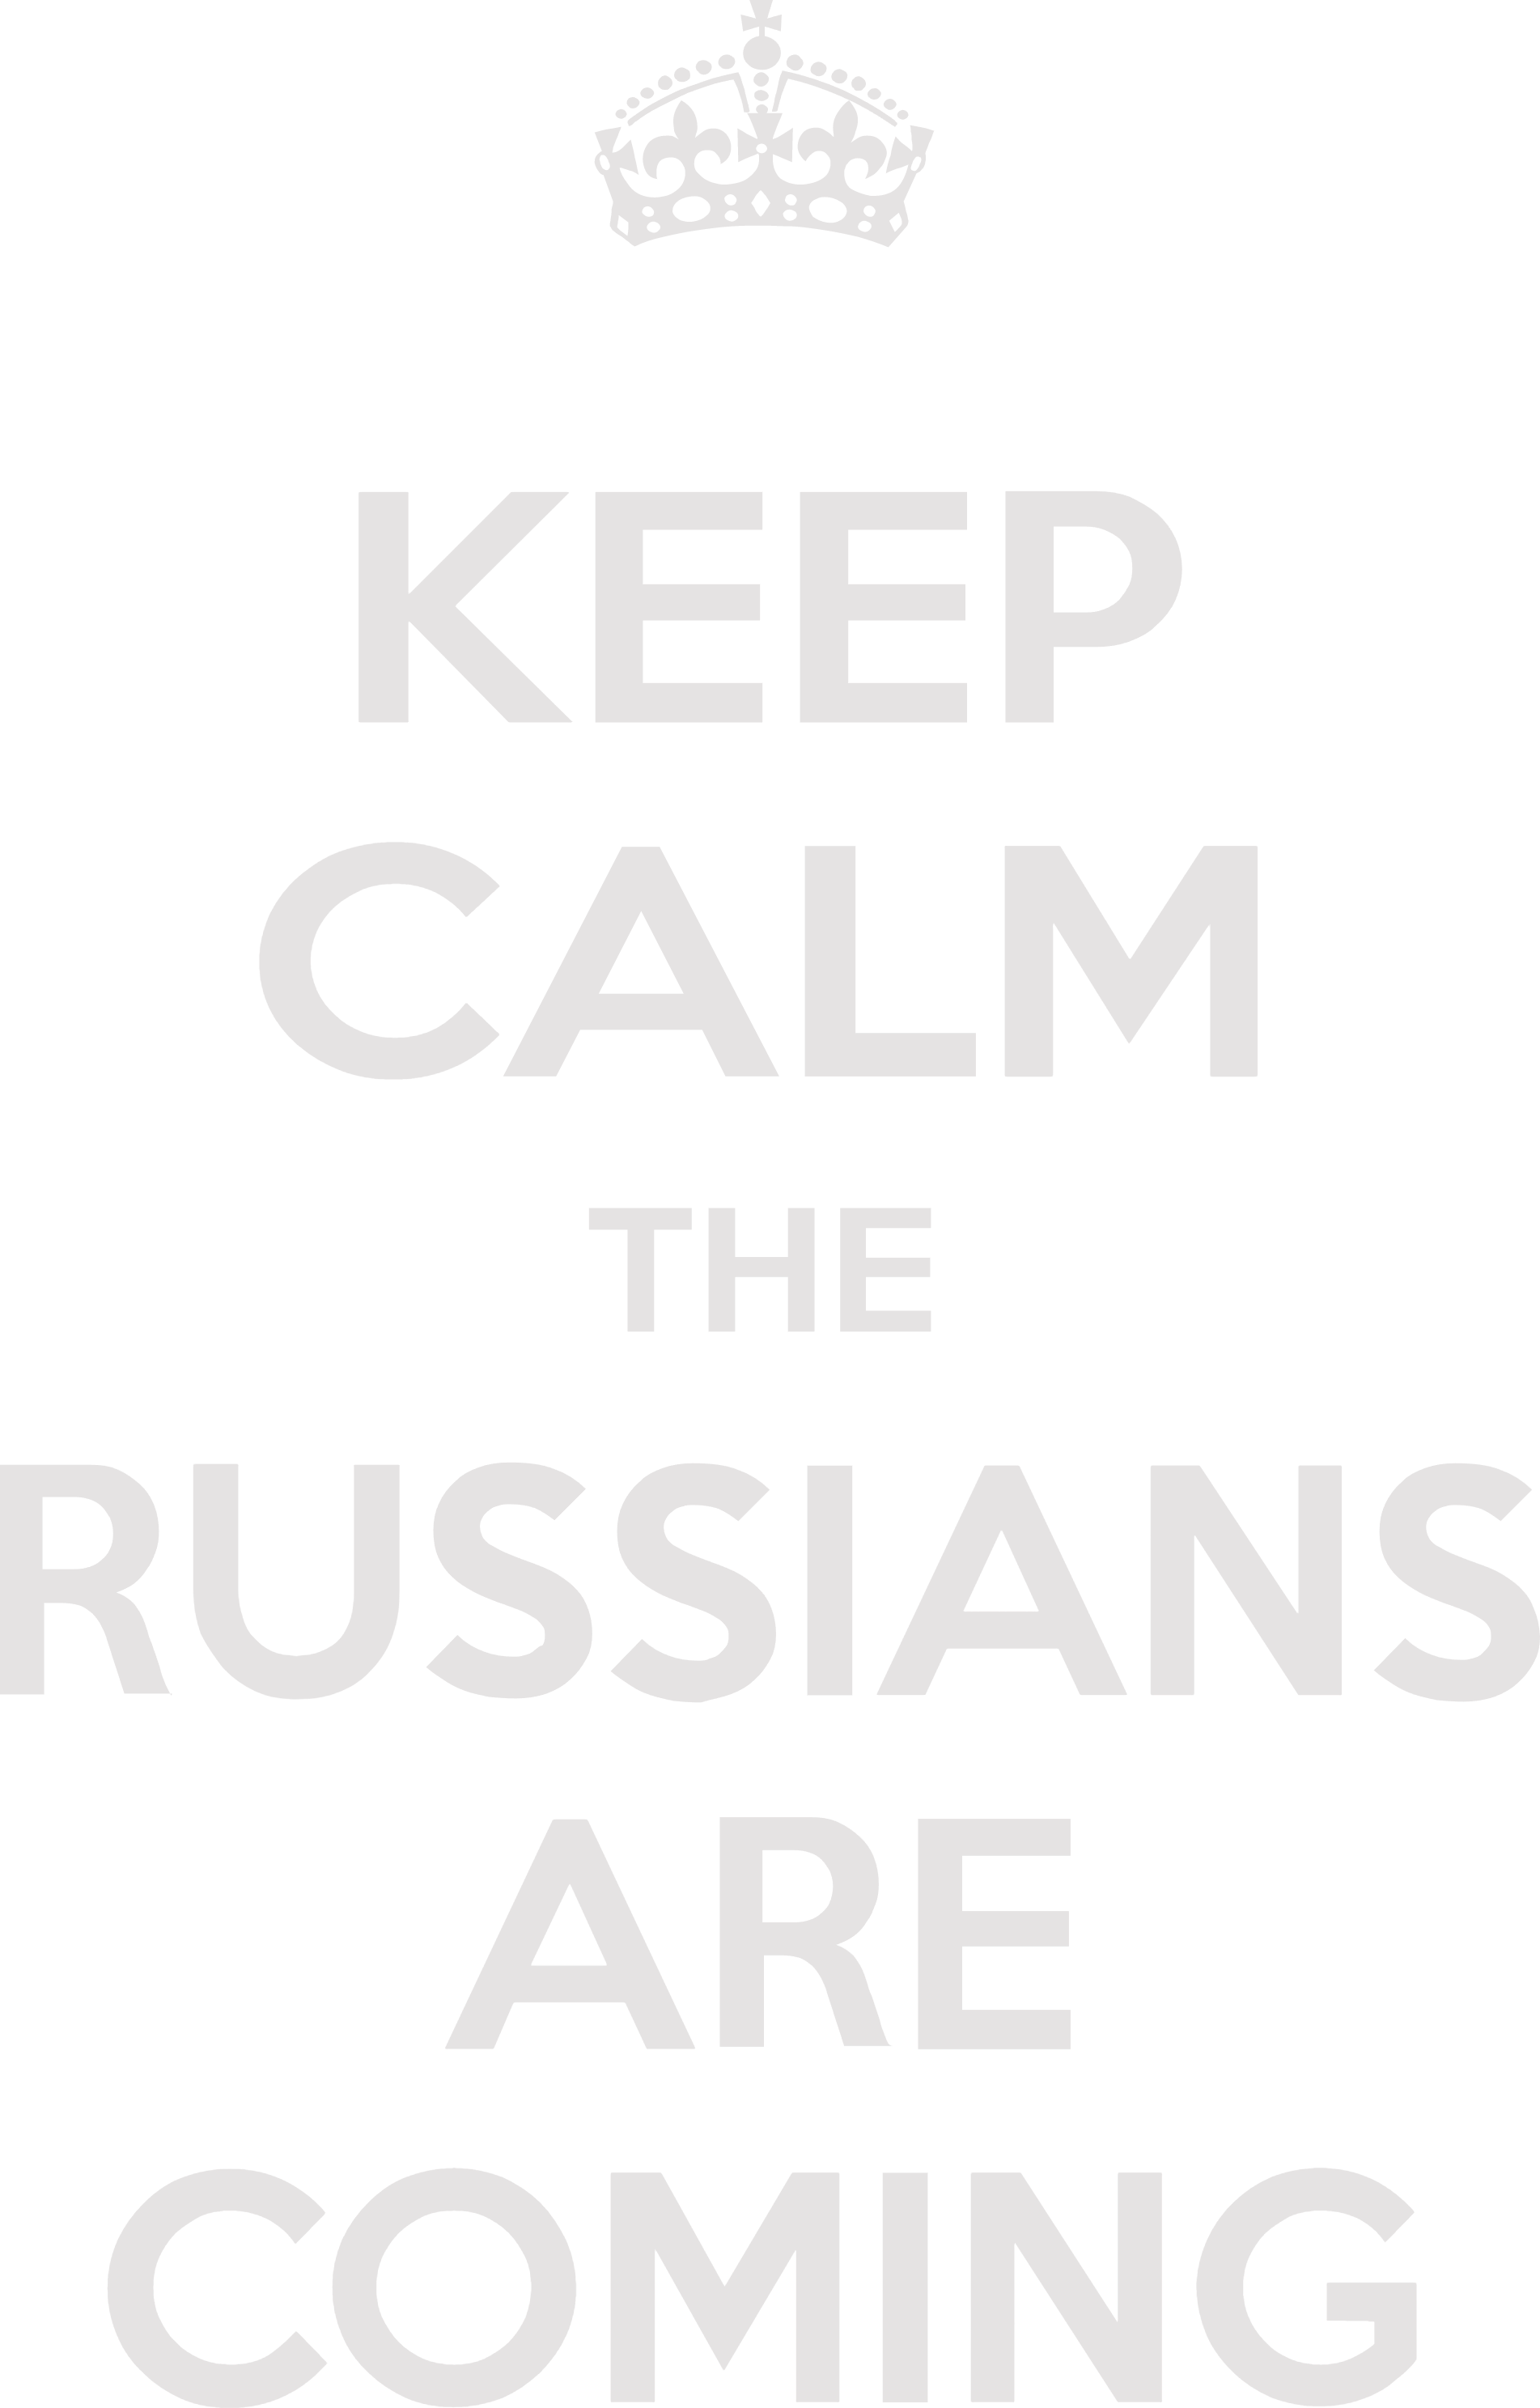 Keep calm the russians are coming